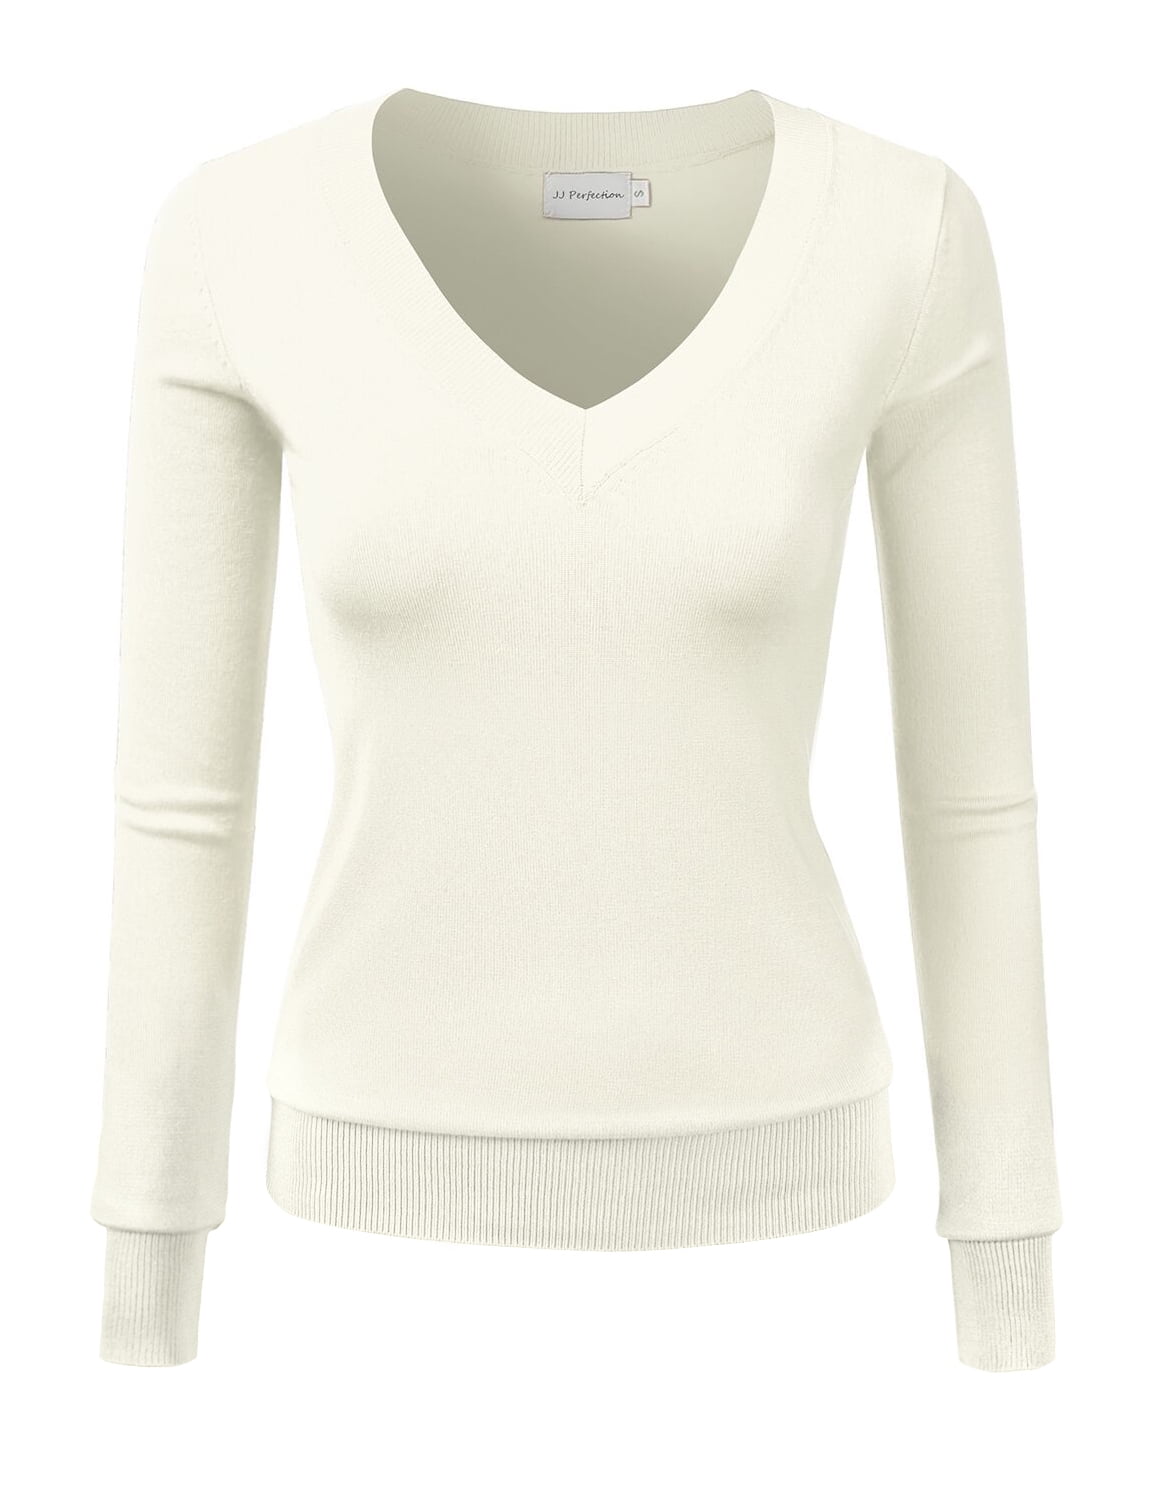 JJ Perfection Women's Long Sleeve V-Neck Pullover Sweater with Plus ...